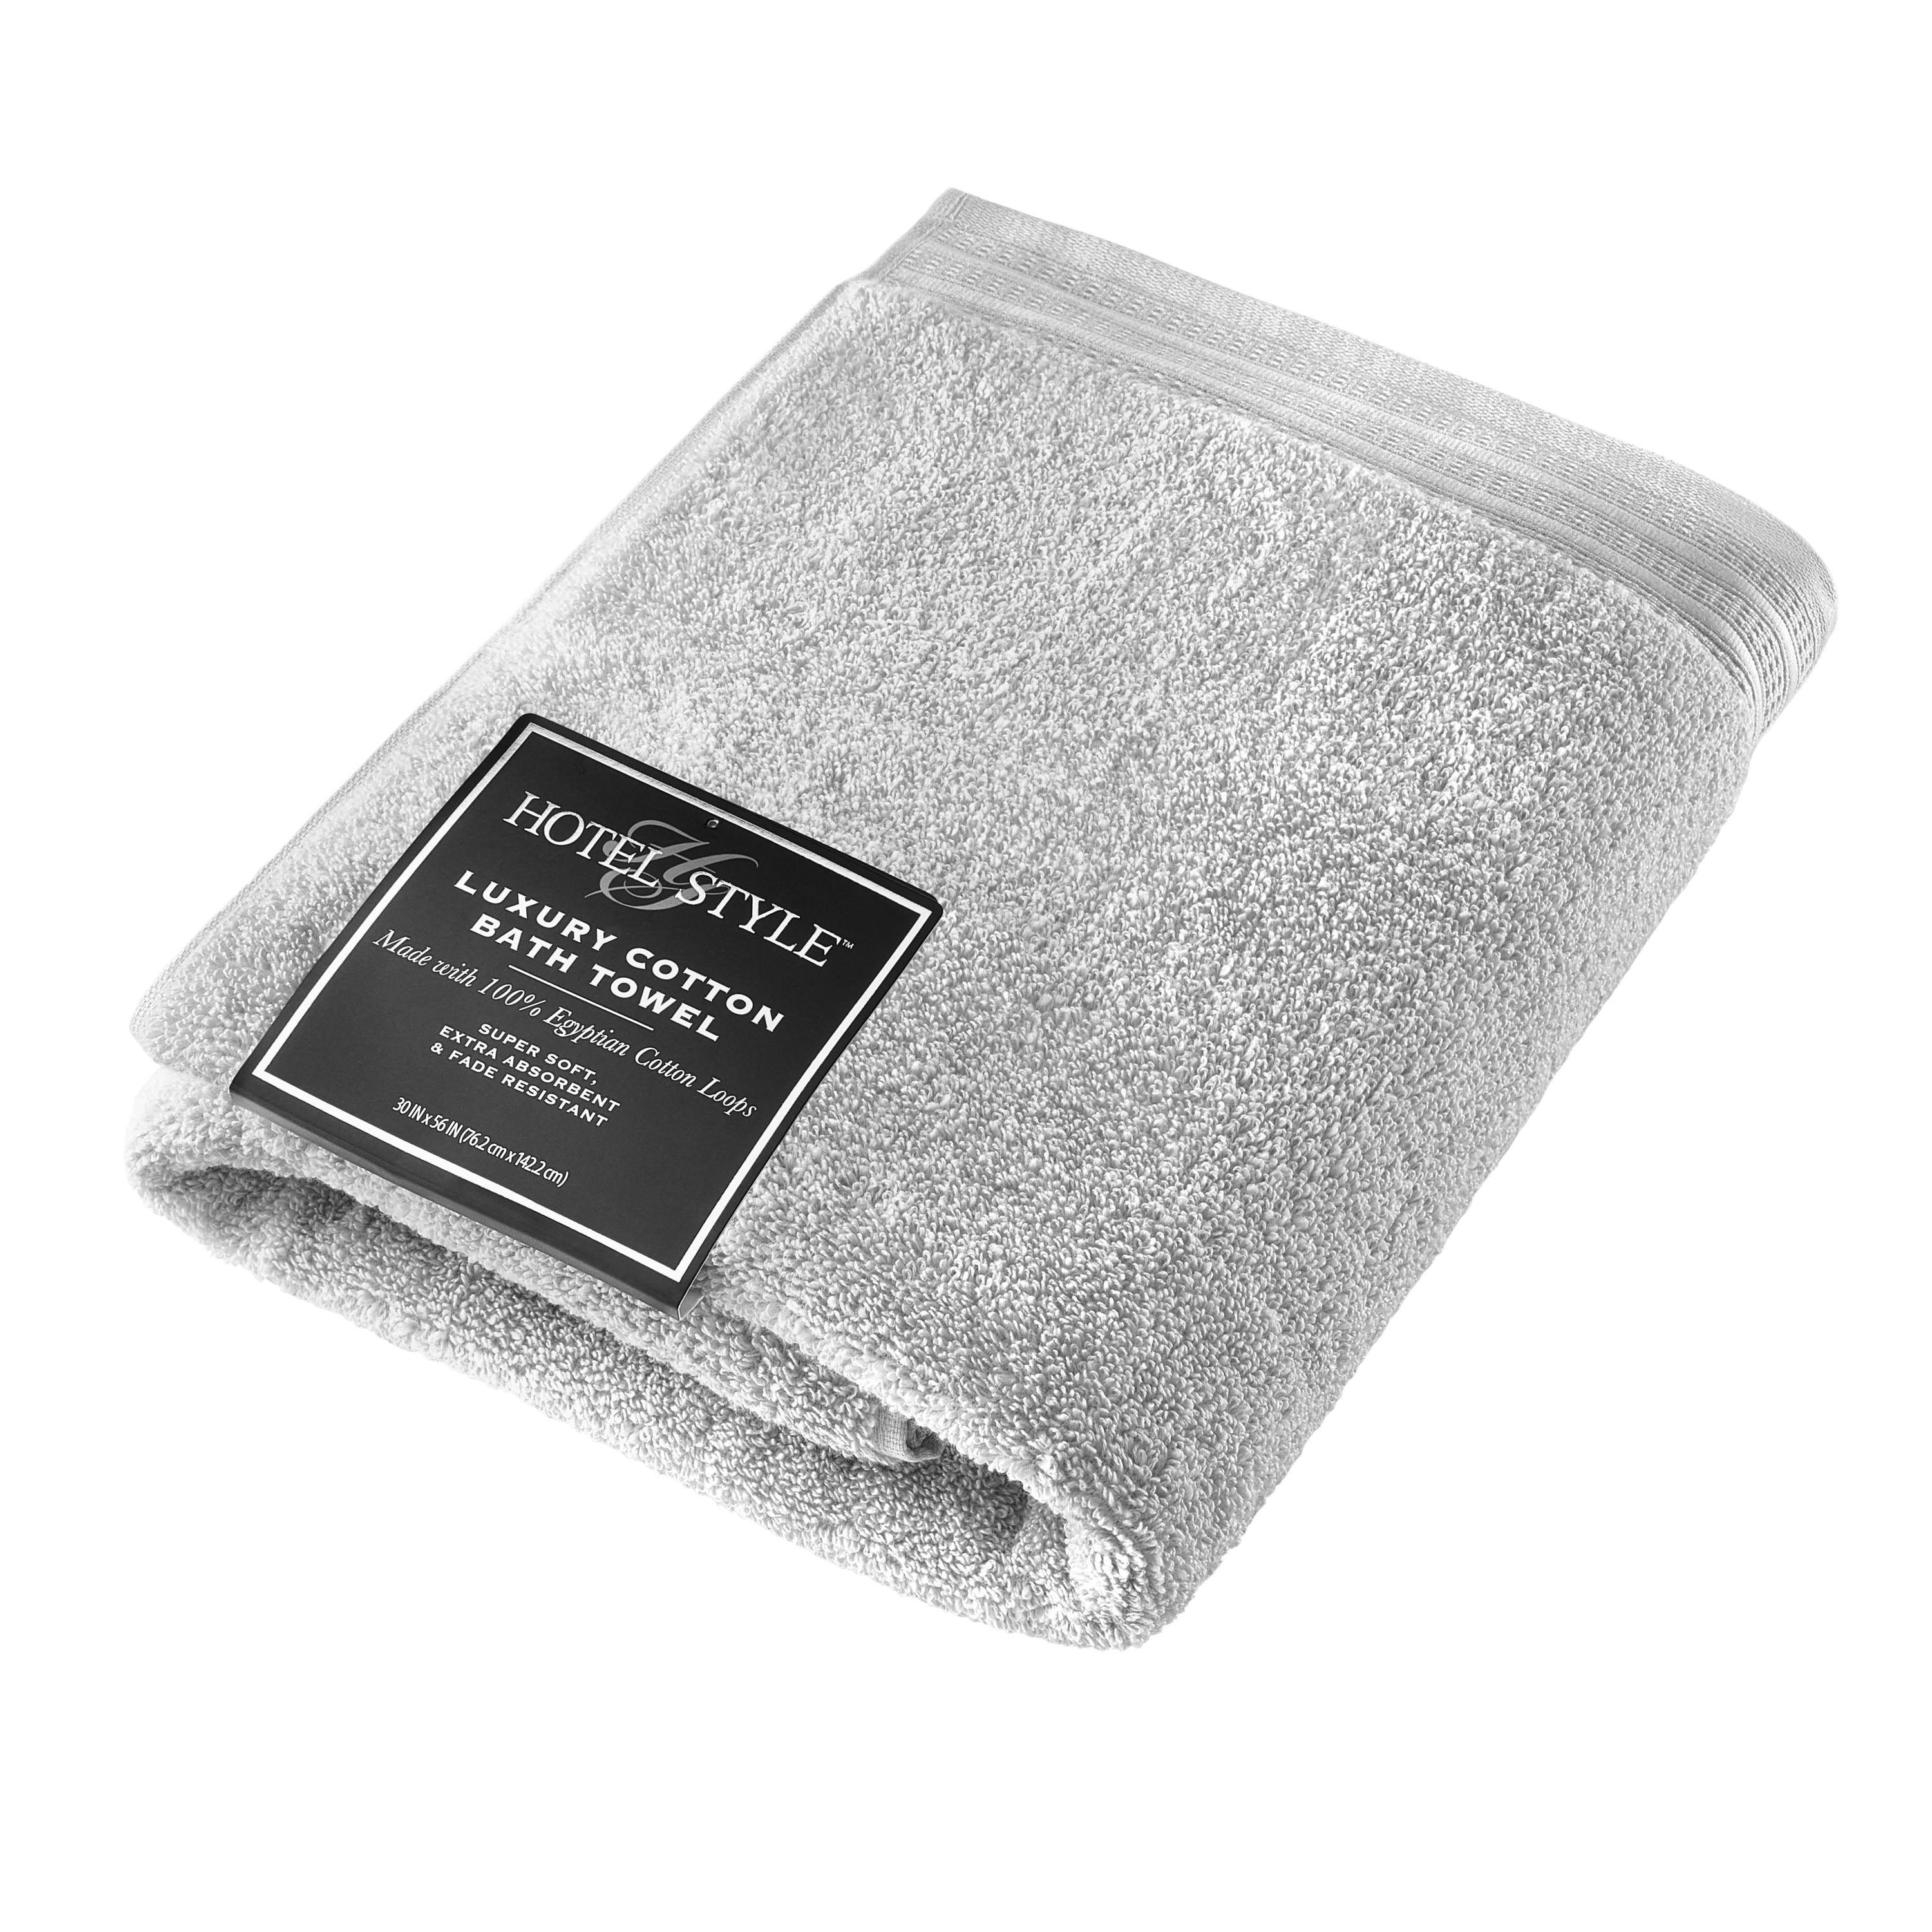 Superior Egyptian Cotton 800 GSM Bath Towel Set, Includes 2 Bath Towels,  Luxury Plush Essentials, Absorbent Quick Dry Towels, Guest Bathroom,  Apartment, New Home, Shower, Hotel Quality, Coral price in Saudi Arabia